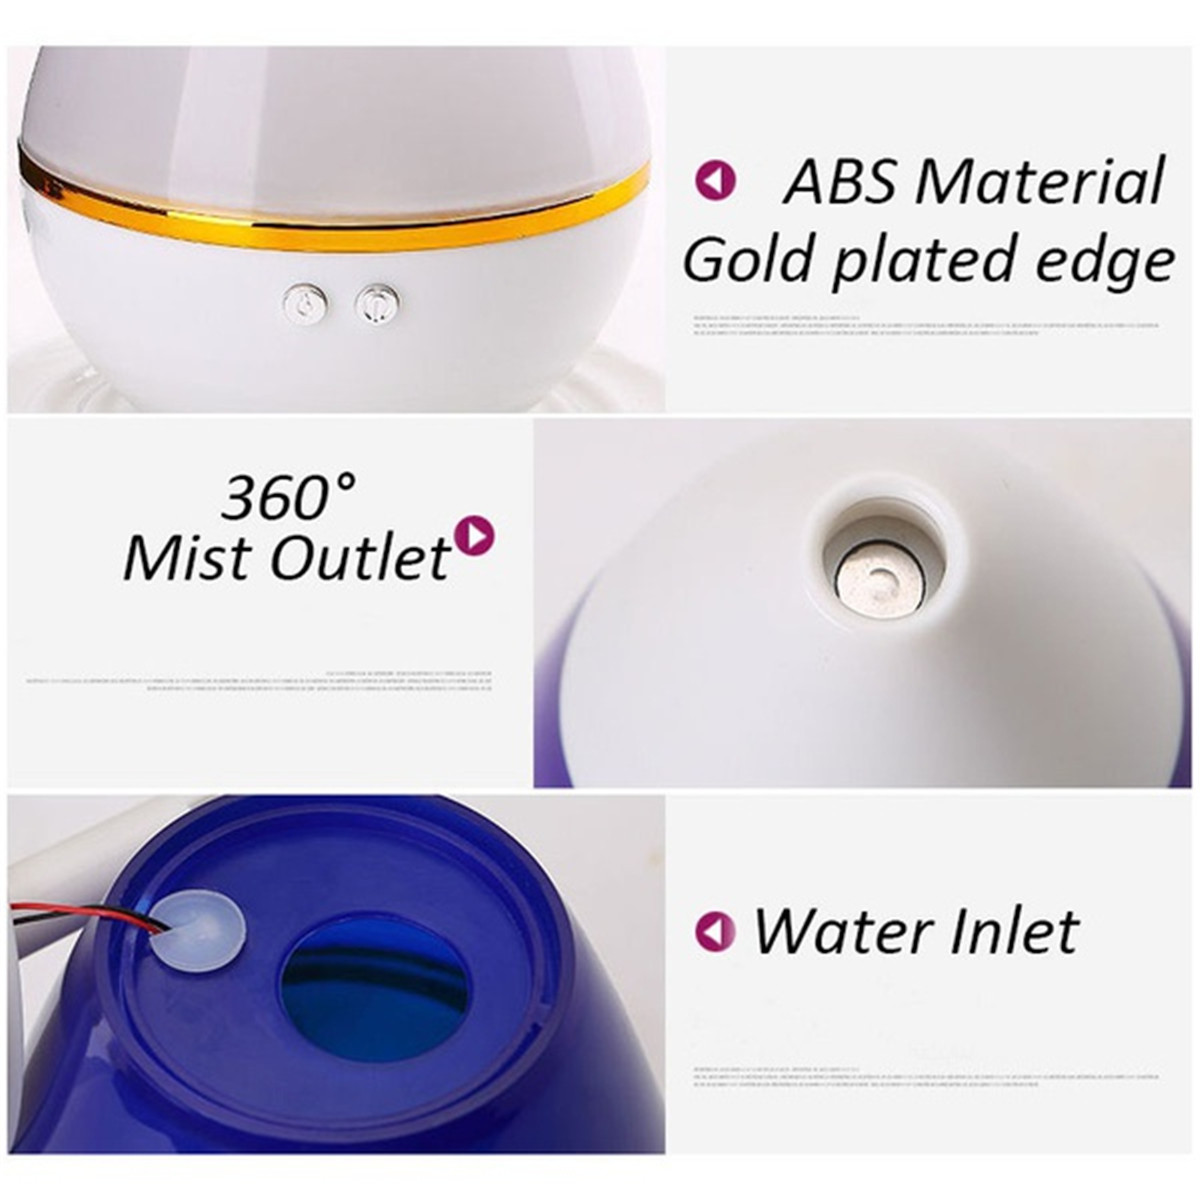 250ml-Ultrasonic-Air-Humidifier-USB-Charging-Essential-Oil-Diffuser-LED-Light-Purifier-for-Home-Offi-1787140-5